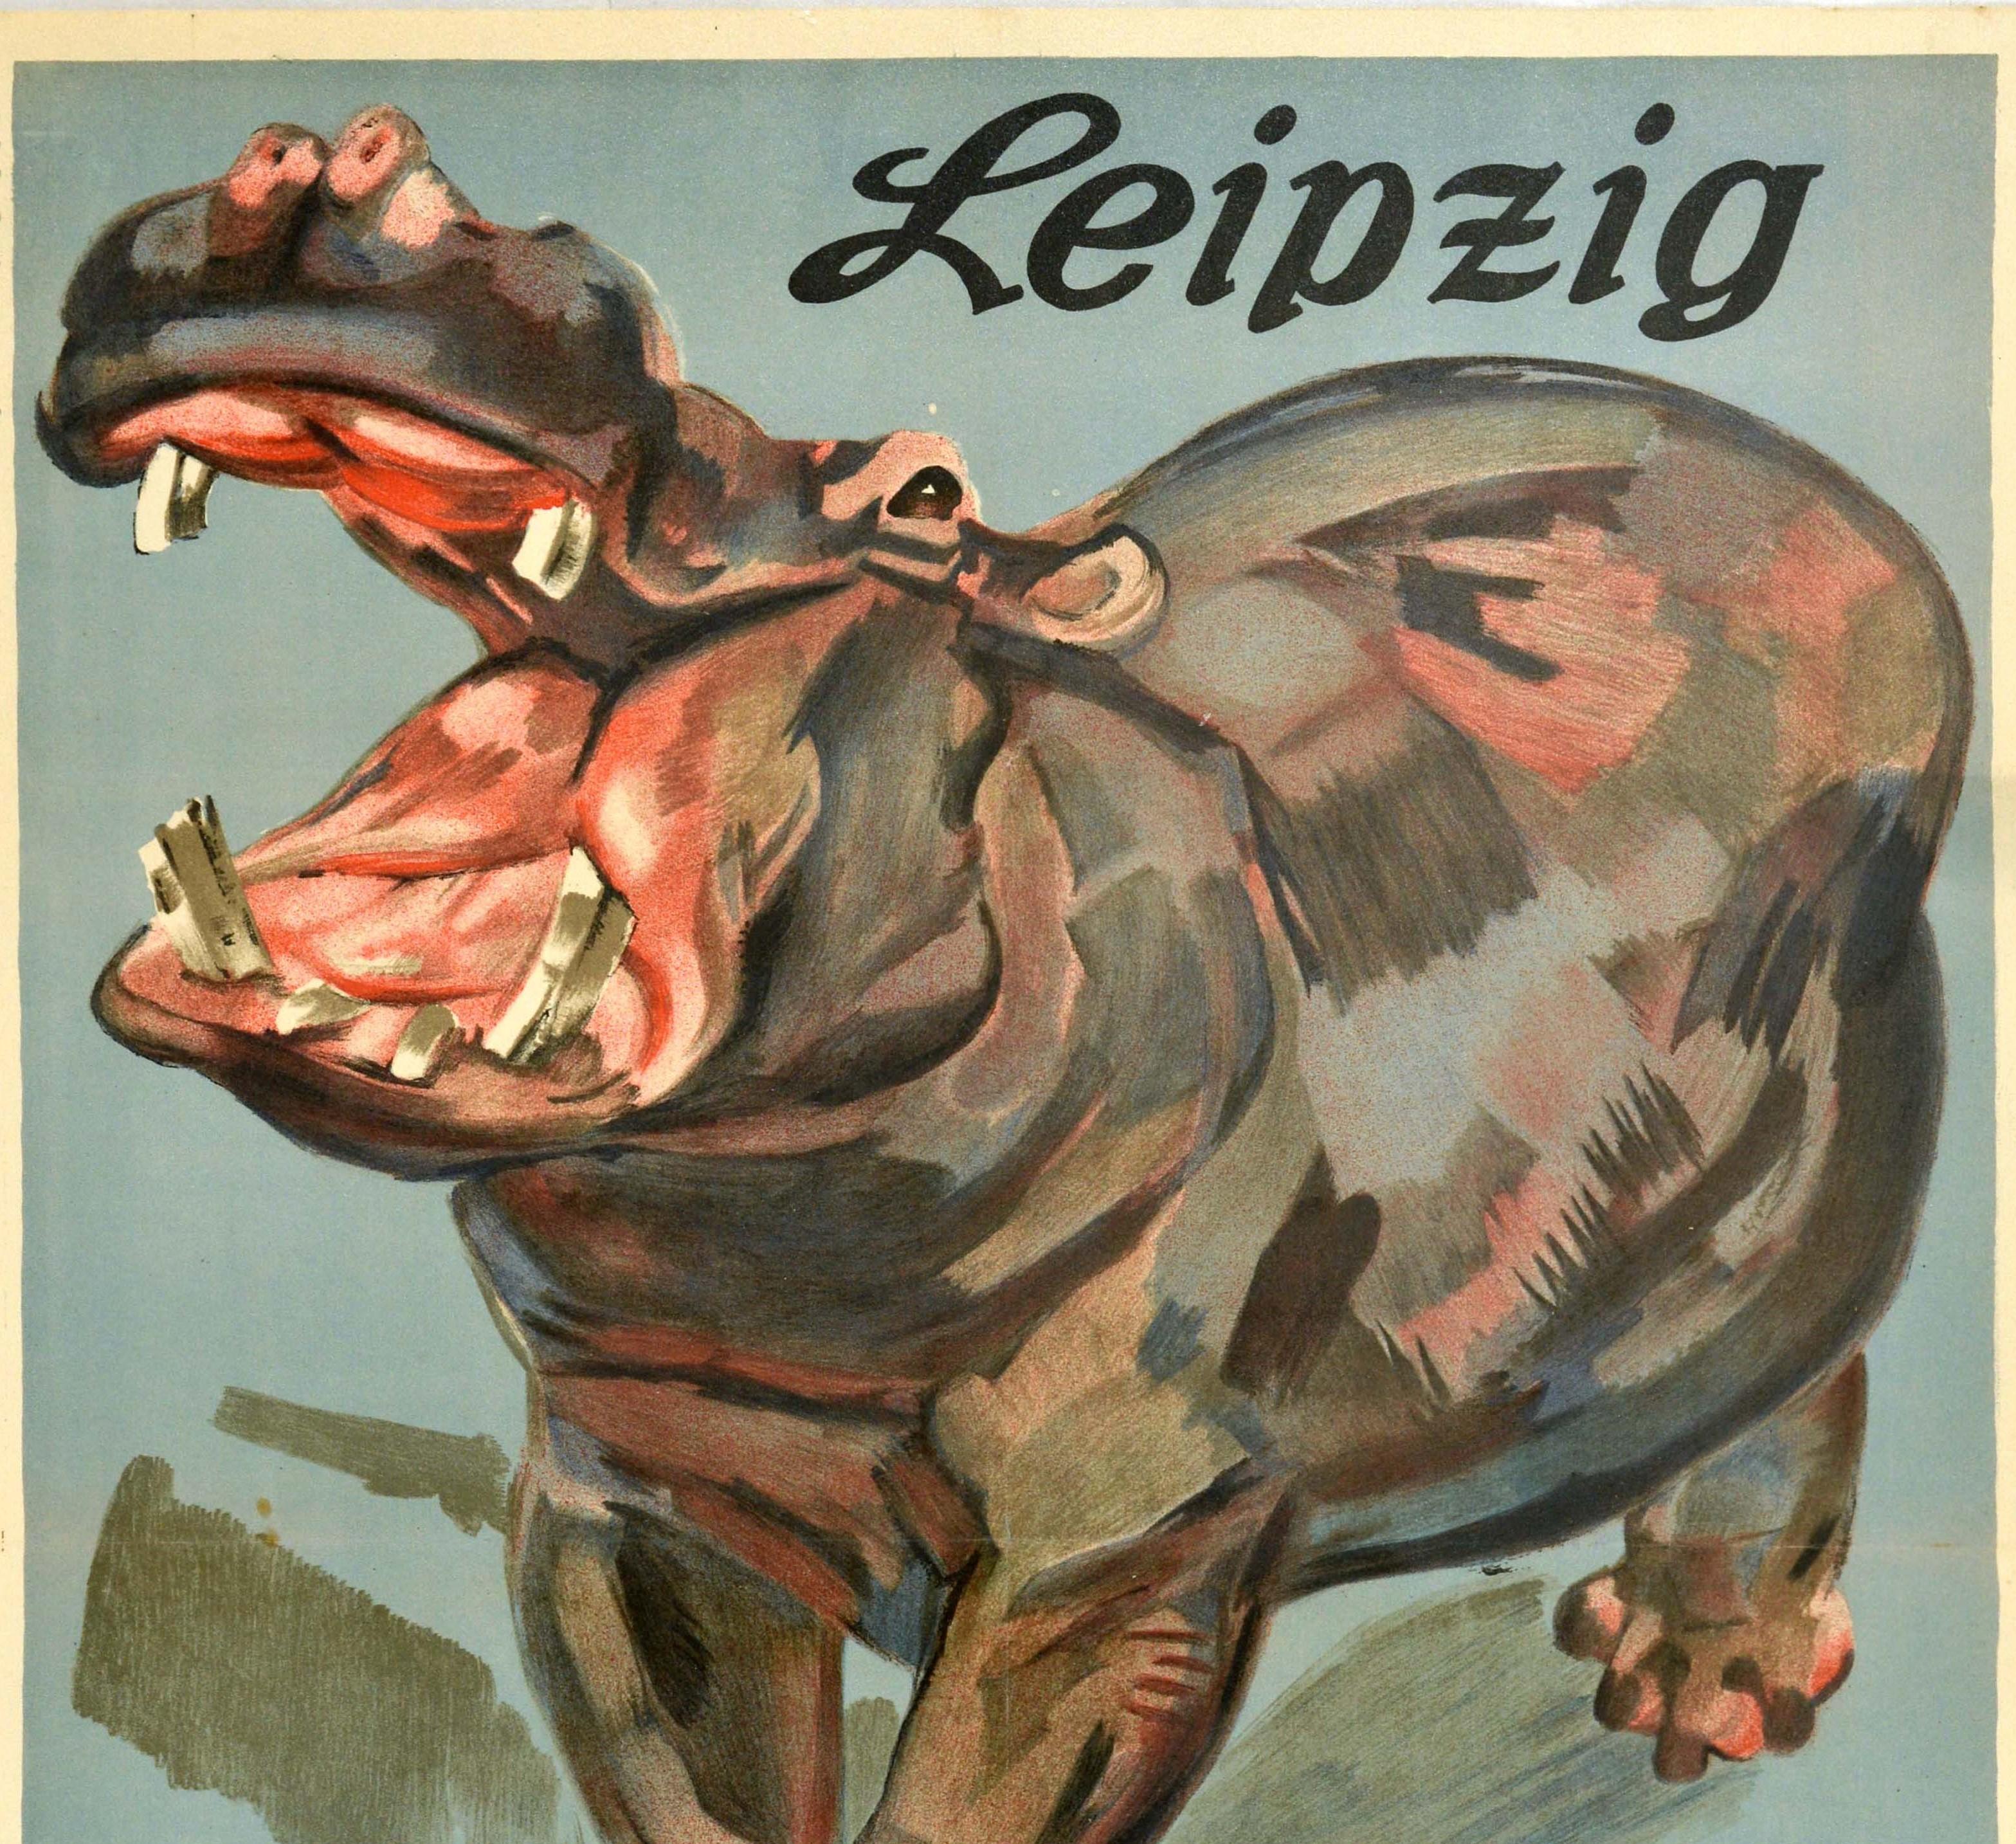 Original vintage travel poster for Leipzig Zoo (opened 1878) in Germany featuring artwork of a hippo with its mouth wide open with the stylised black cursive lettering above and below. Good condition, minor staining, restored folds and paper loss on